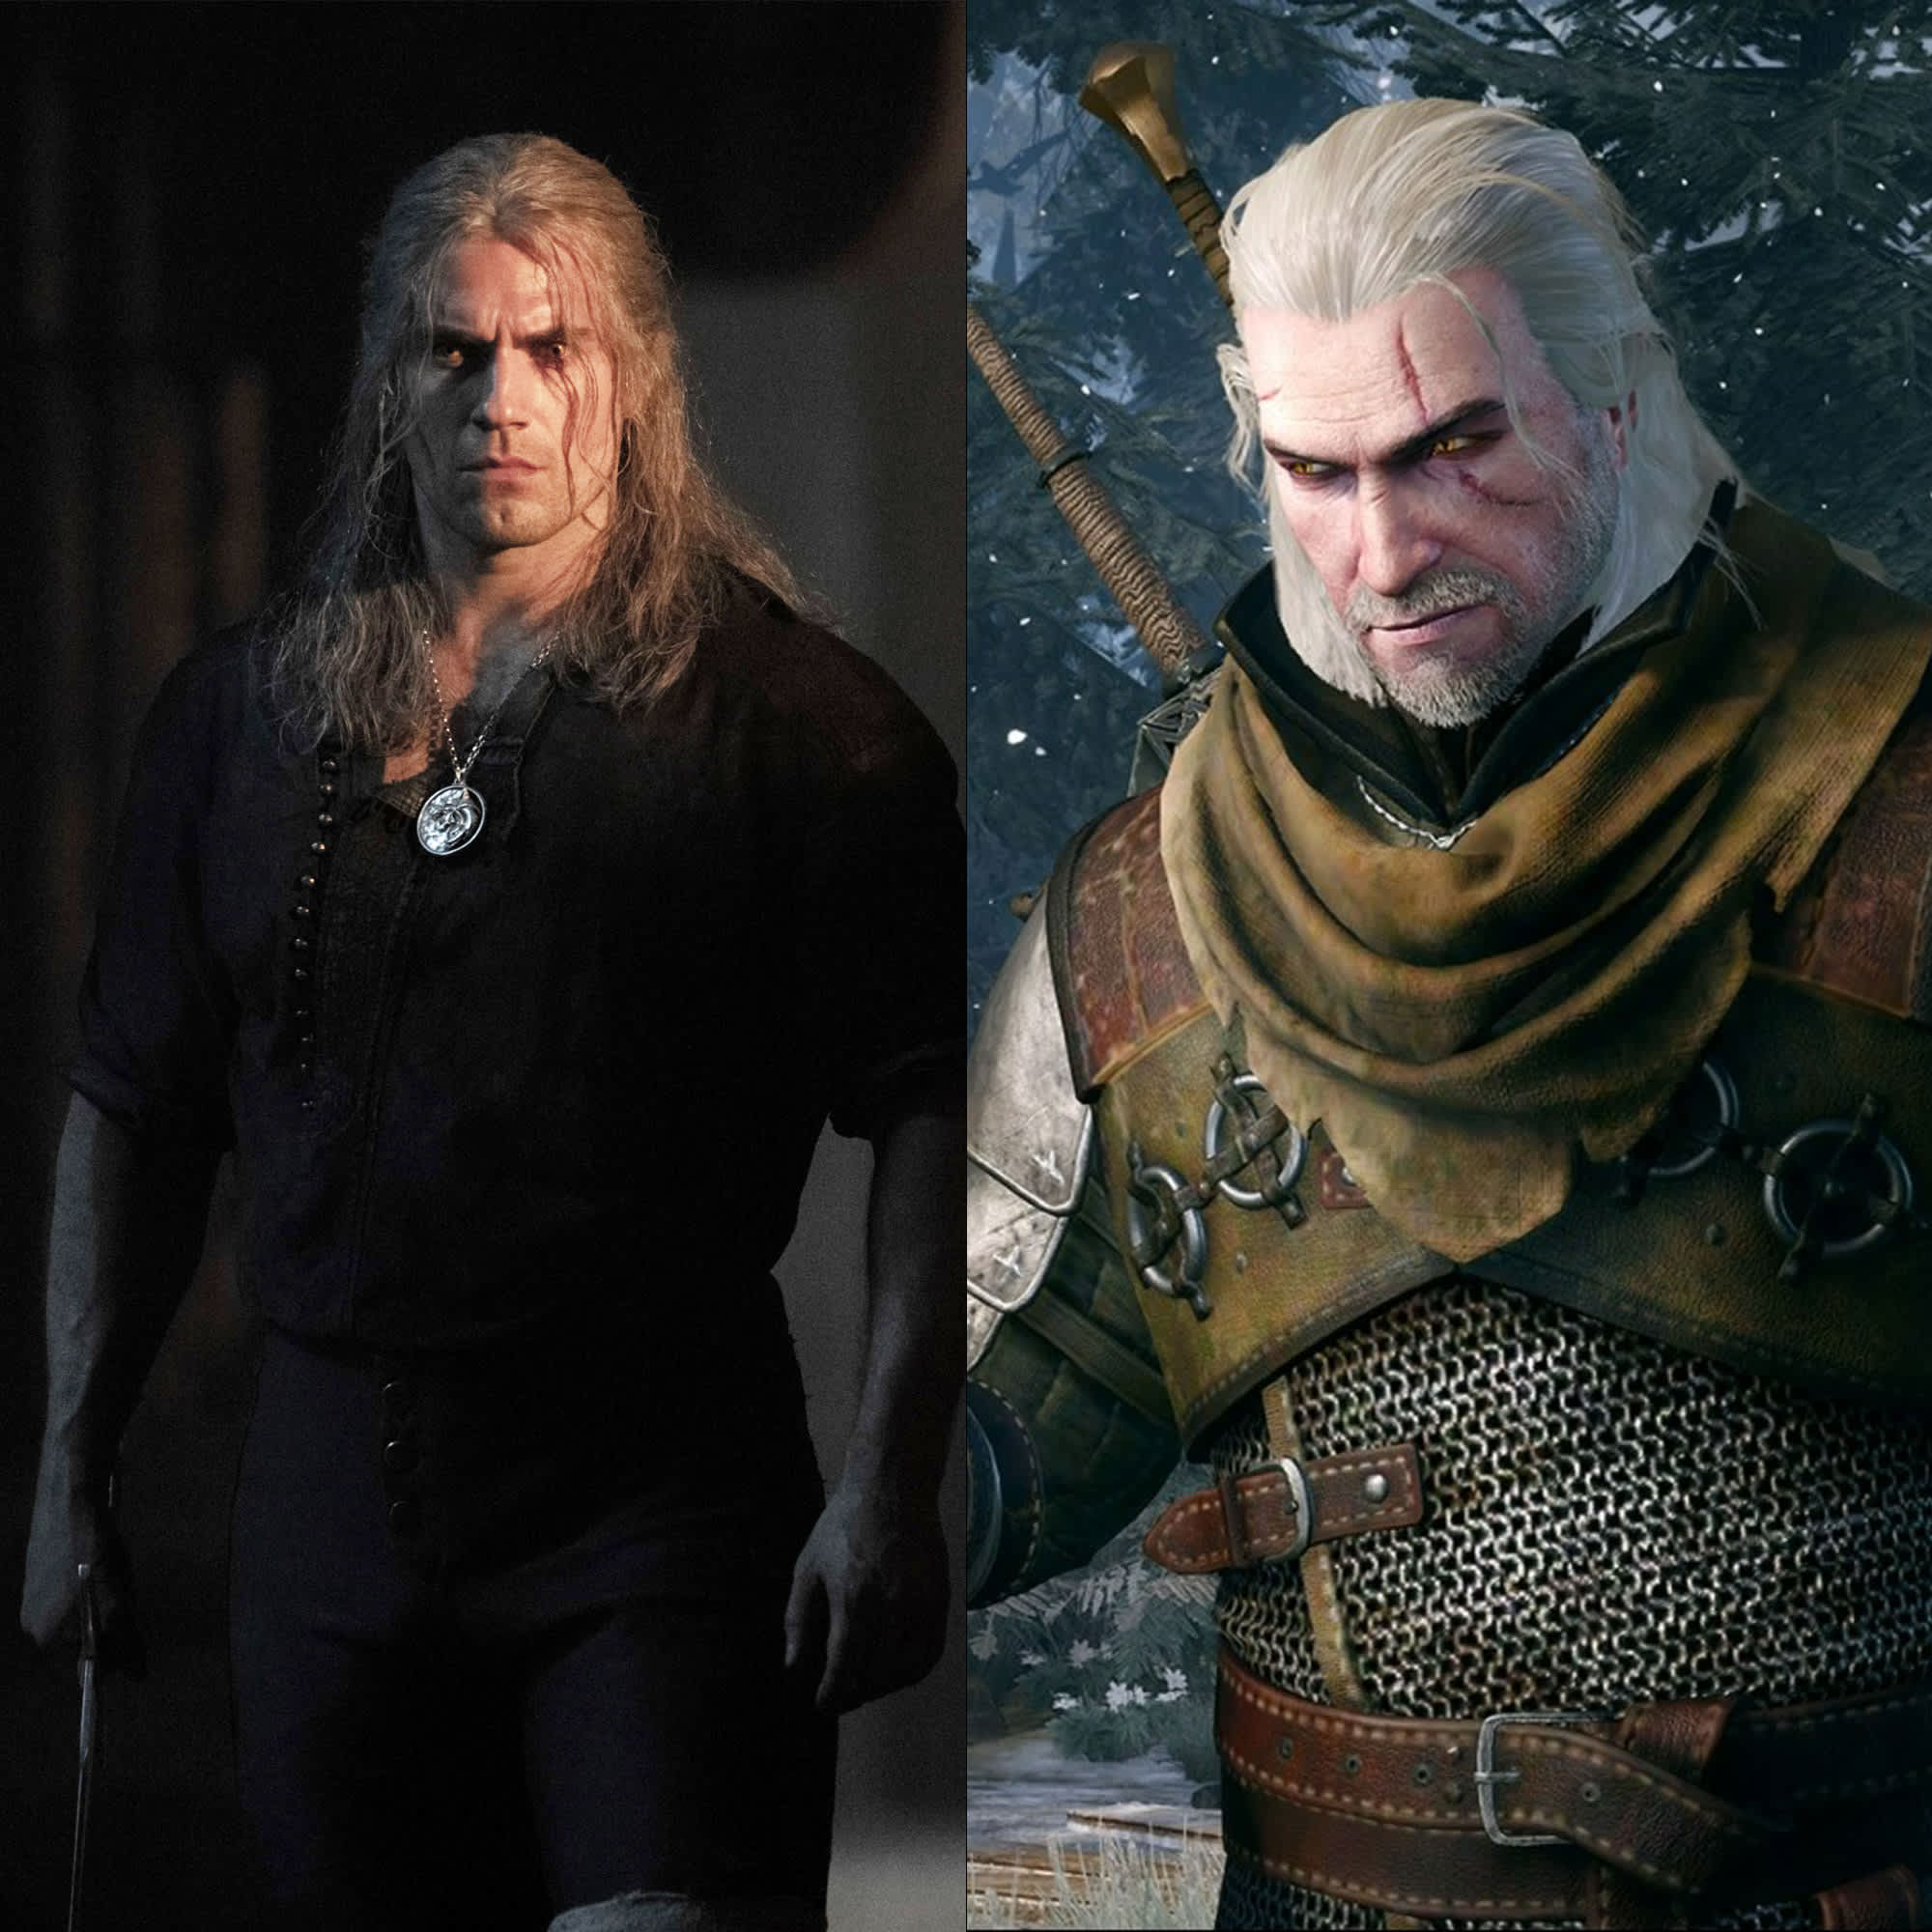 Get the full The Witcher Netflix treatment with these mods for the